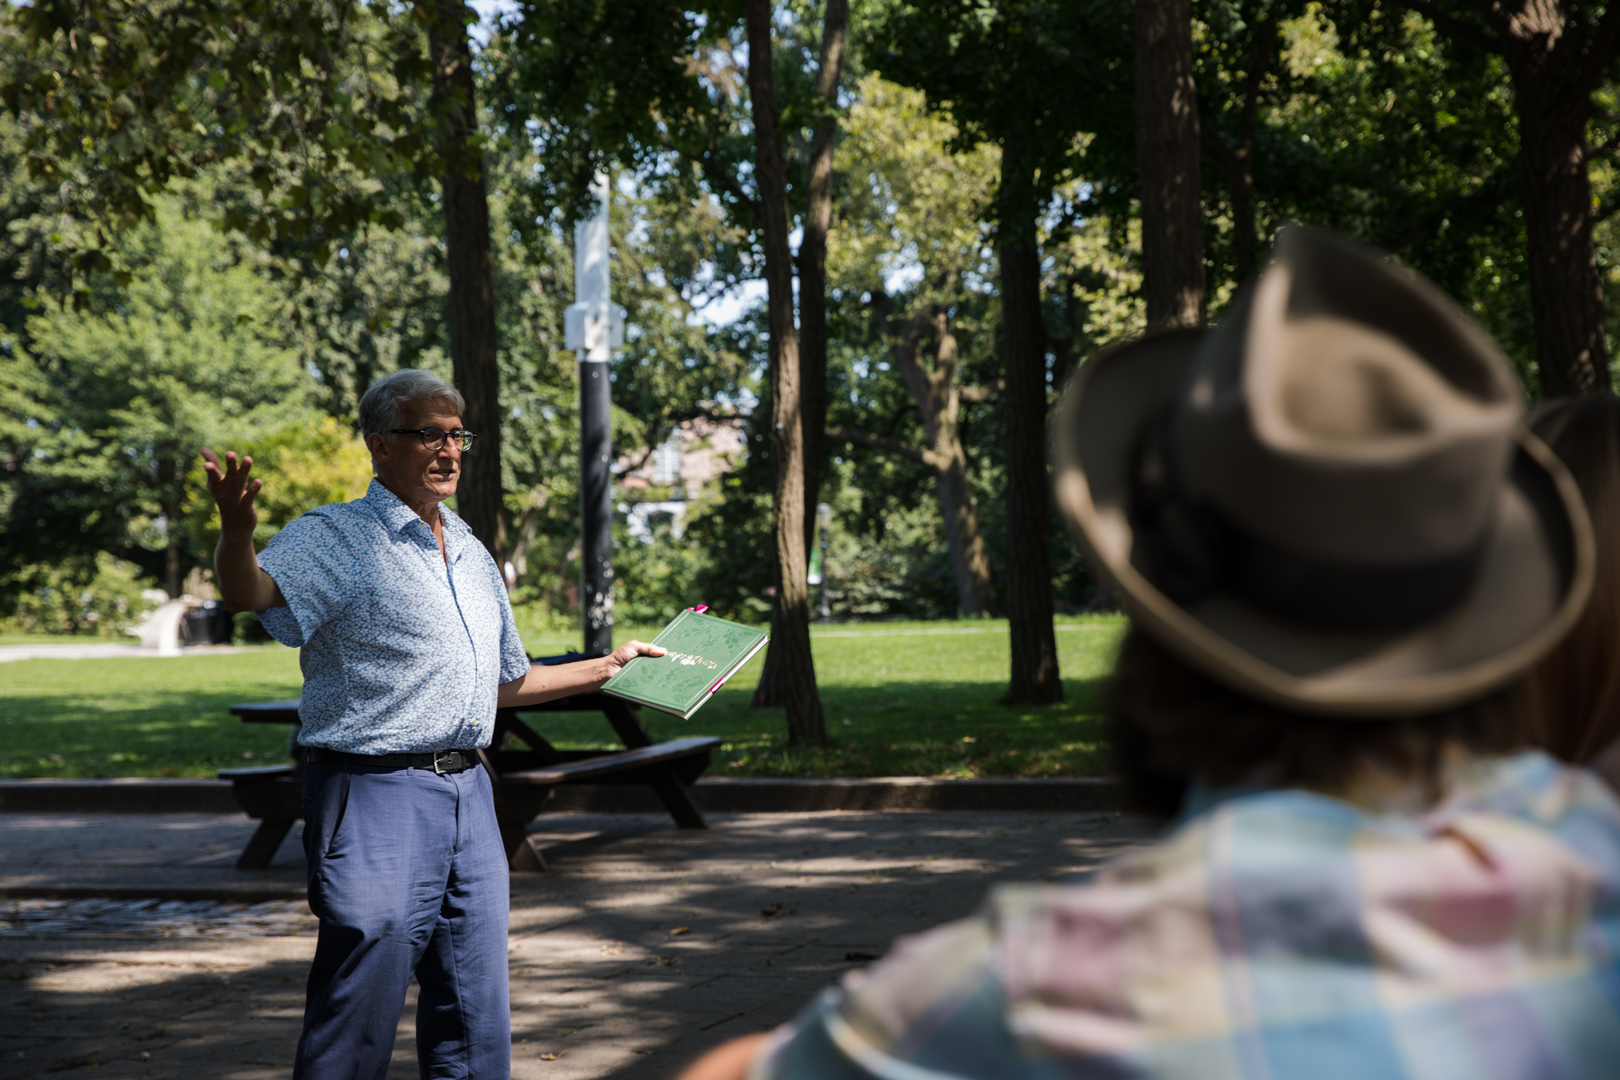 Up in Fort Greene Park, the Walt Whitman Project’s Greg Trupiano talks about the Revolutionary War. Eagle photo by Paul Frangipane